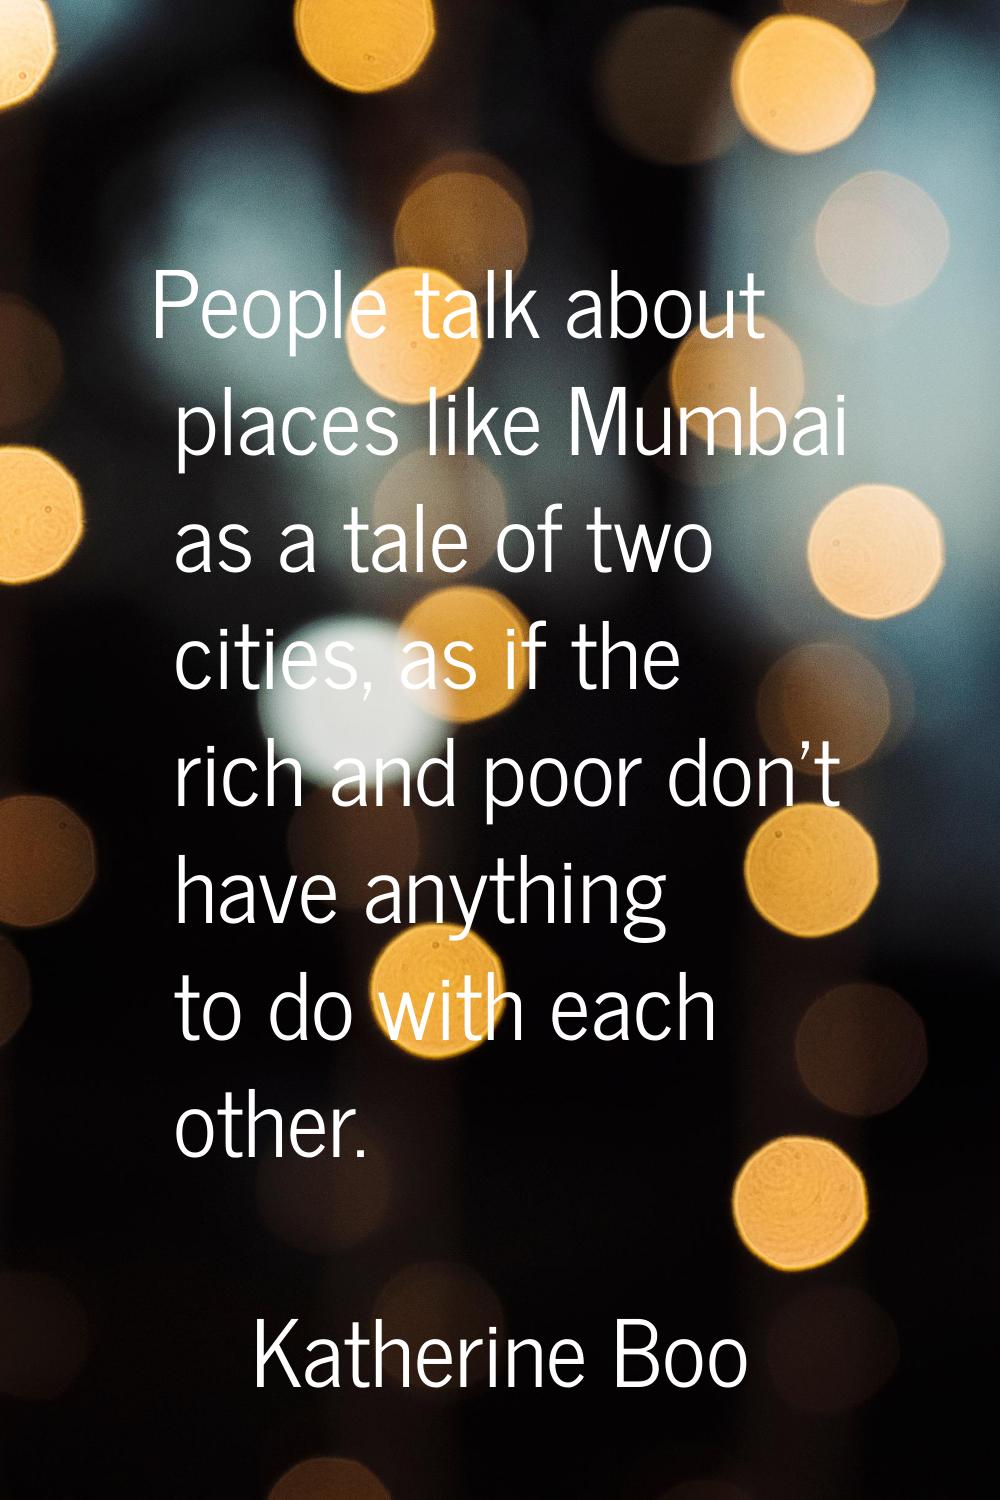 People talk about places like Mumbai as a tale of two cities, as if the rich and poor don't have an